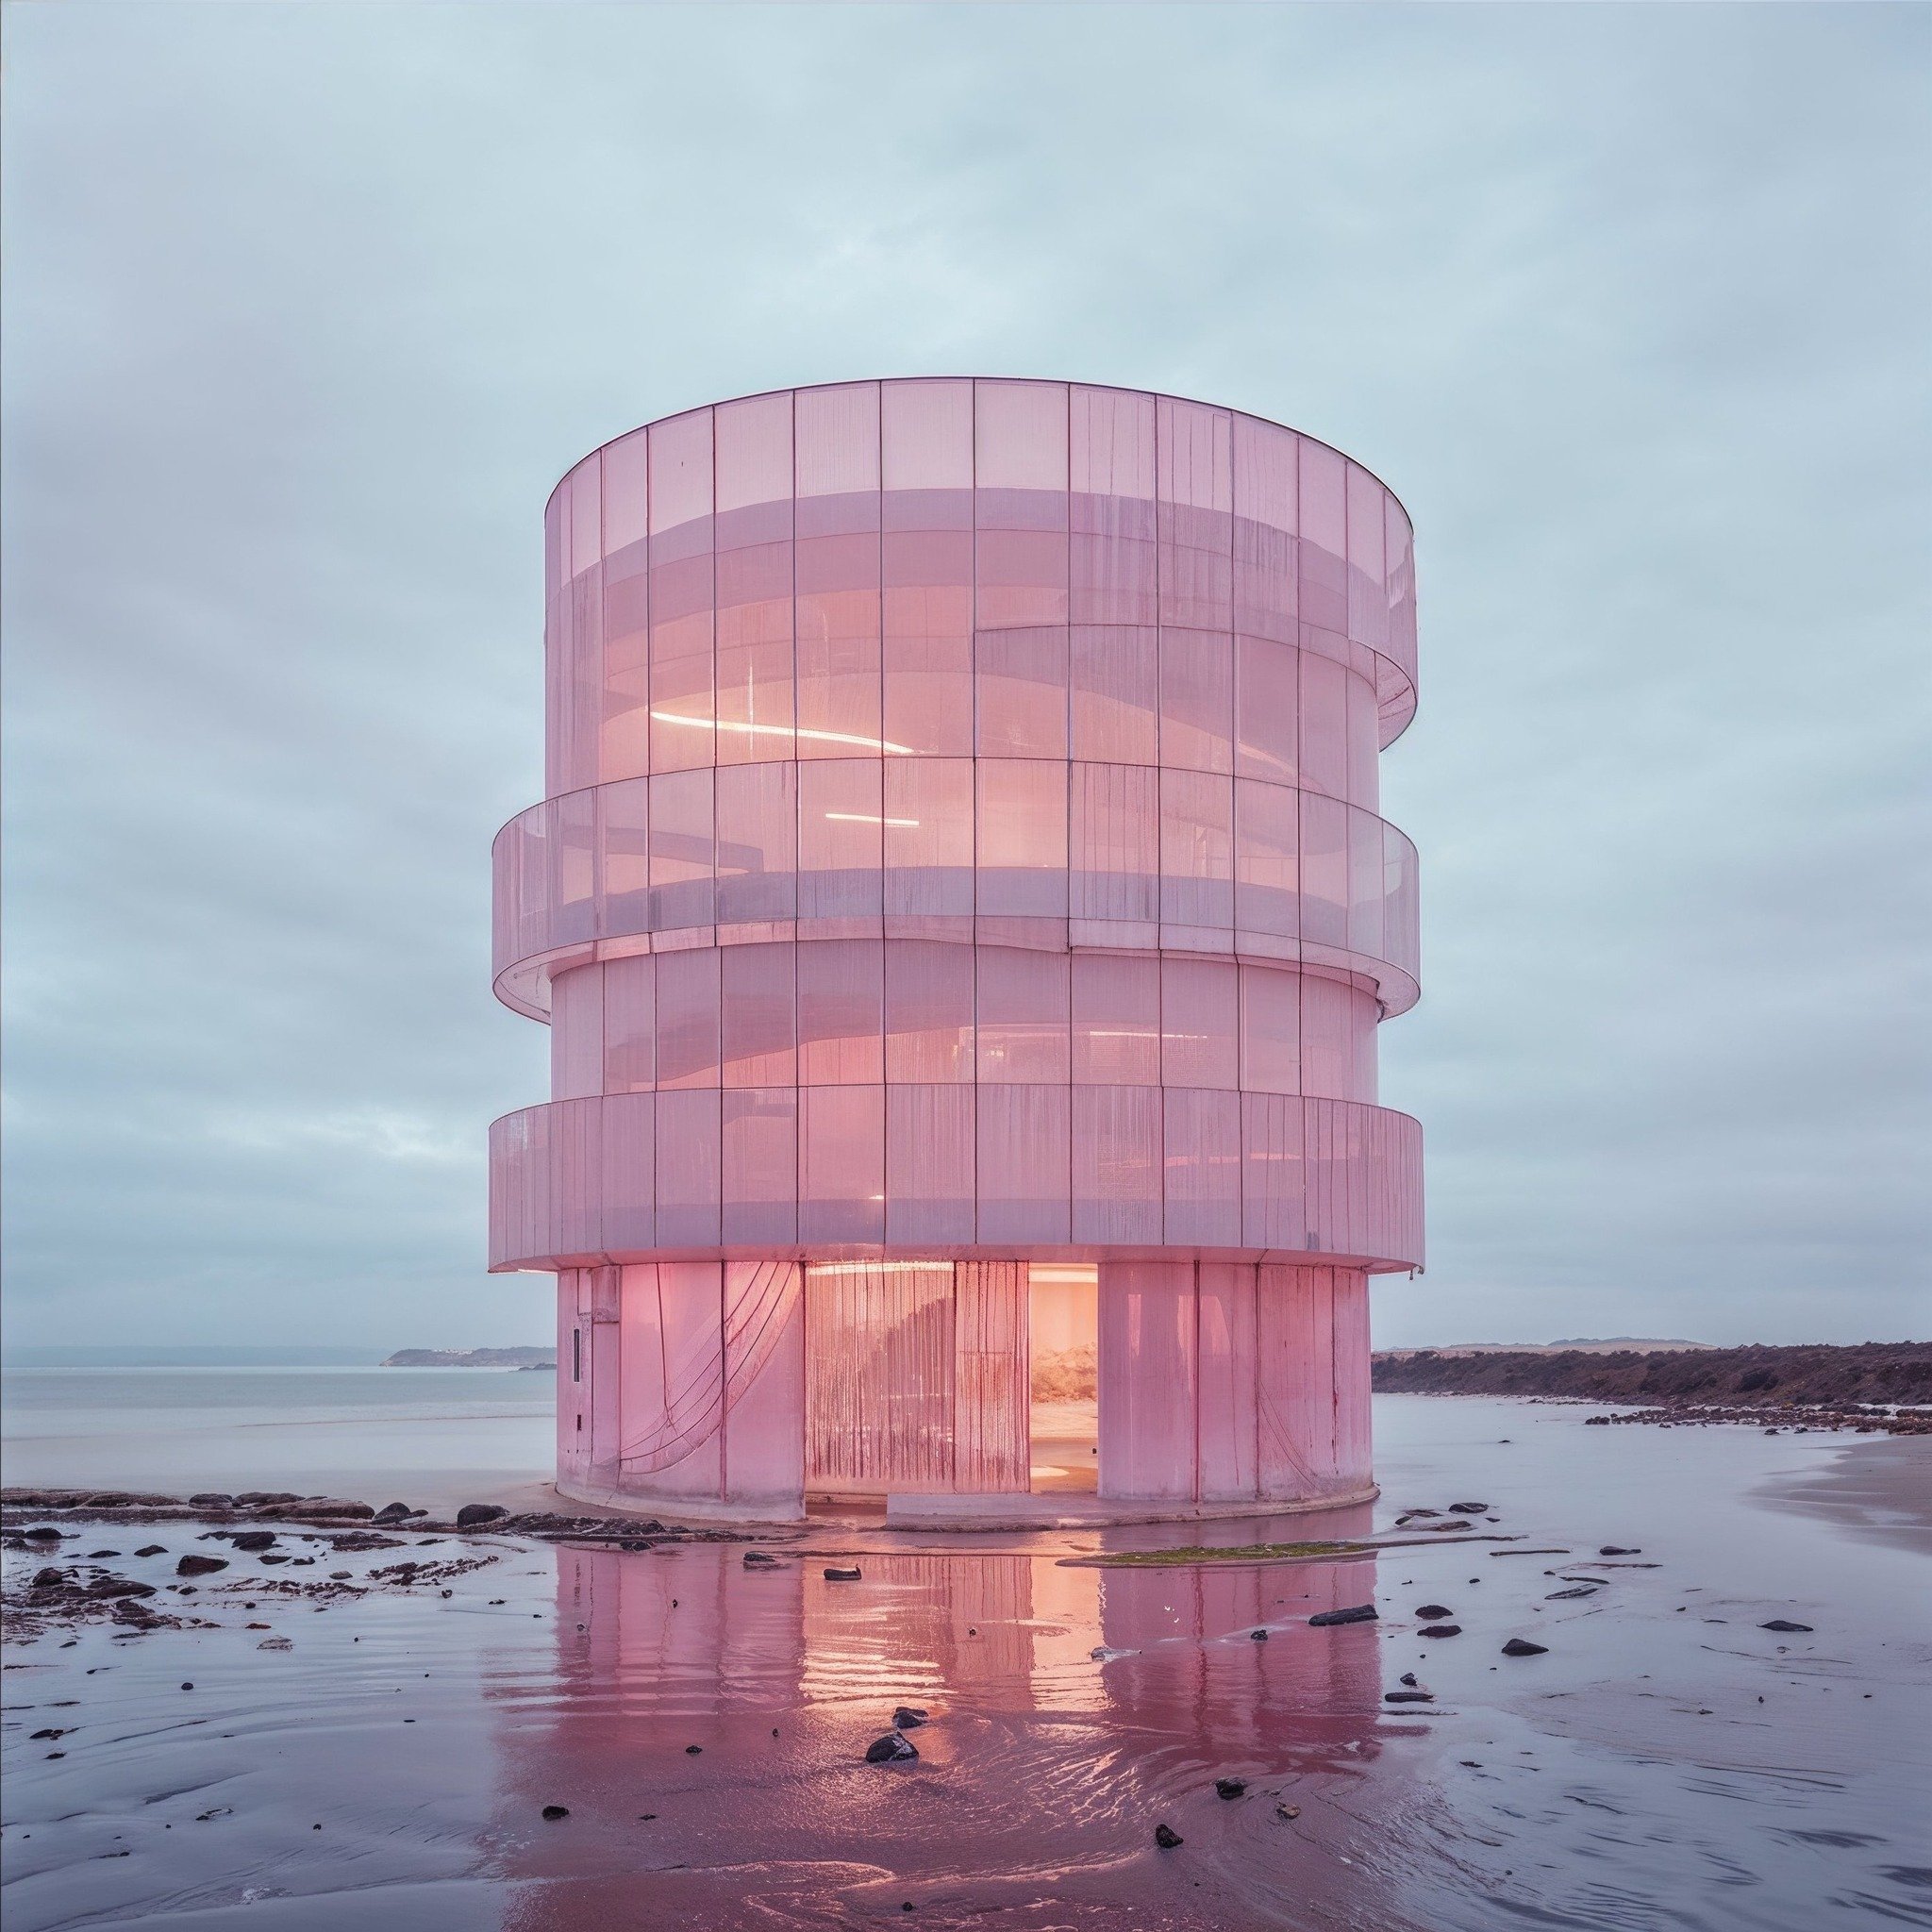 Pink Structure On The Shore 🦩
.
.
 #midjourney #midjourneyai #midjourneyart #midjourneyarchitecture  #architecturelovers #architectureinspiration #architecturaldesign #aiarchitecture #architecture